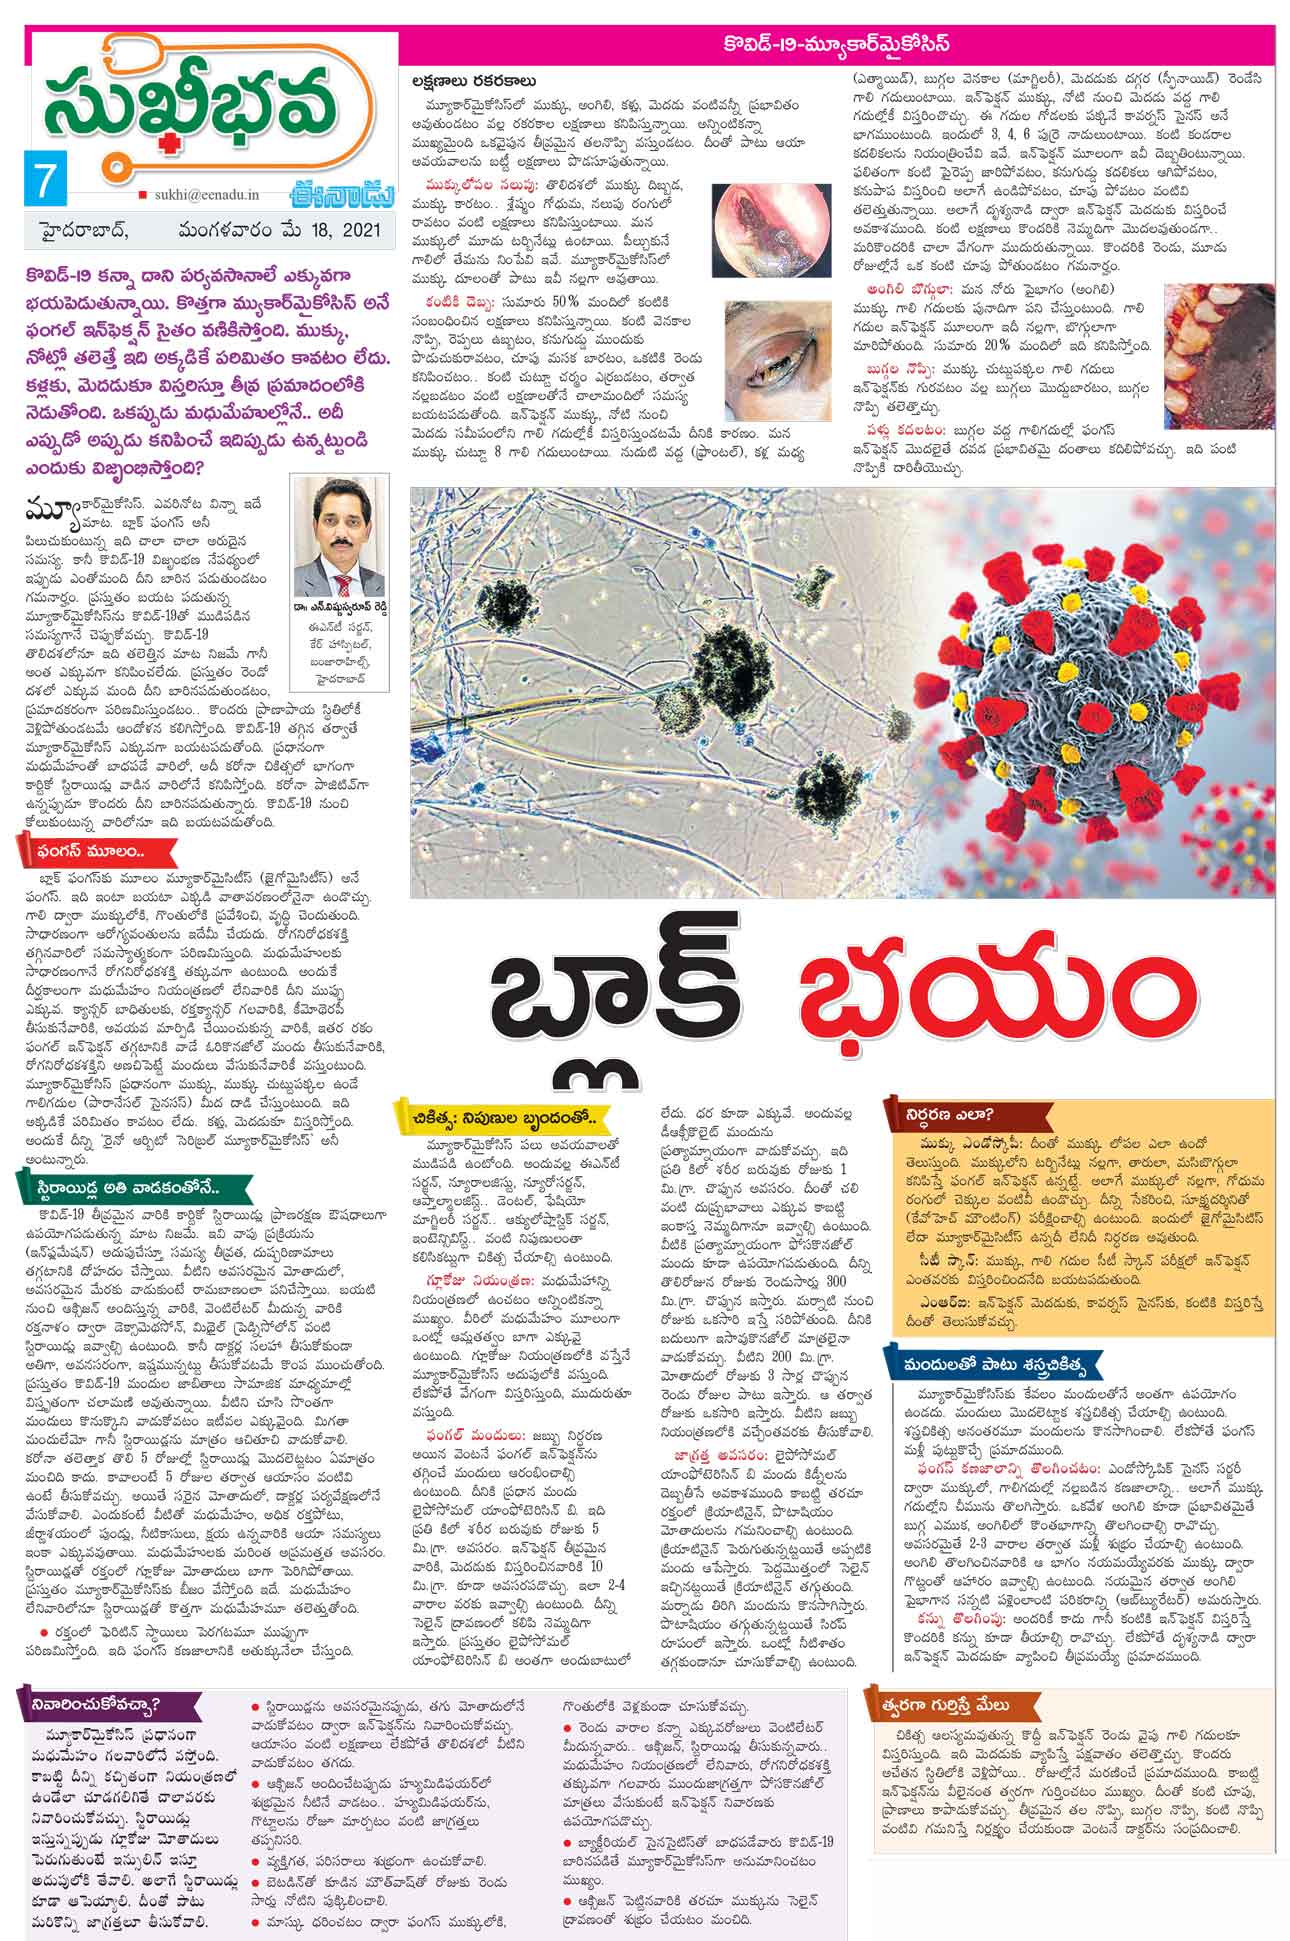 Article on Black Fungs by Dr. Vishnu Swaroop Reddy - Head of the Dept. & Chief Consultant ENT and Facial Plastic Surgeon